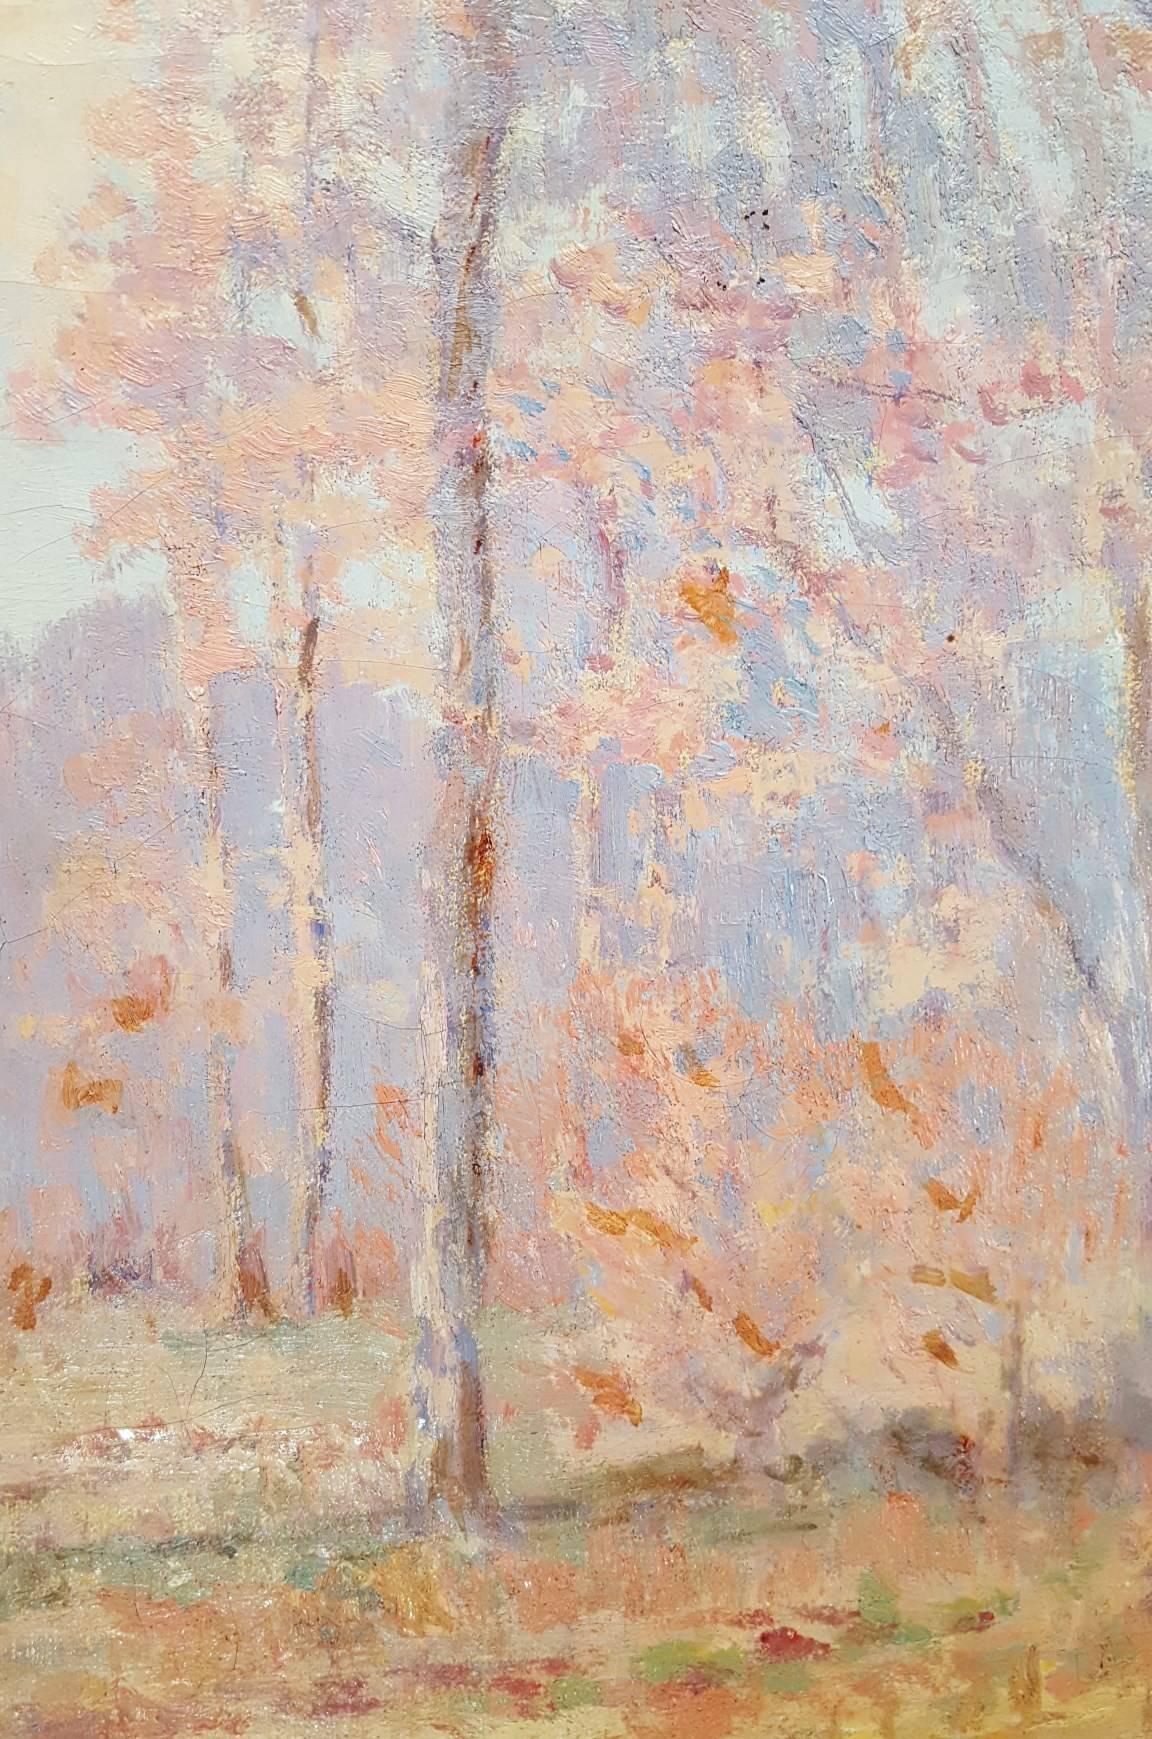 An original signed oil on canvas by Swedish-American artist Alfred Jansson (1863-1931) titled "Impressionist Autumn Landscape", 1921. Signed and dated by Jansson lower right. Framed in its original period frame. Framed size: 26" x